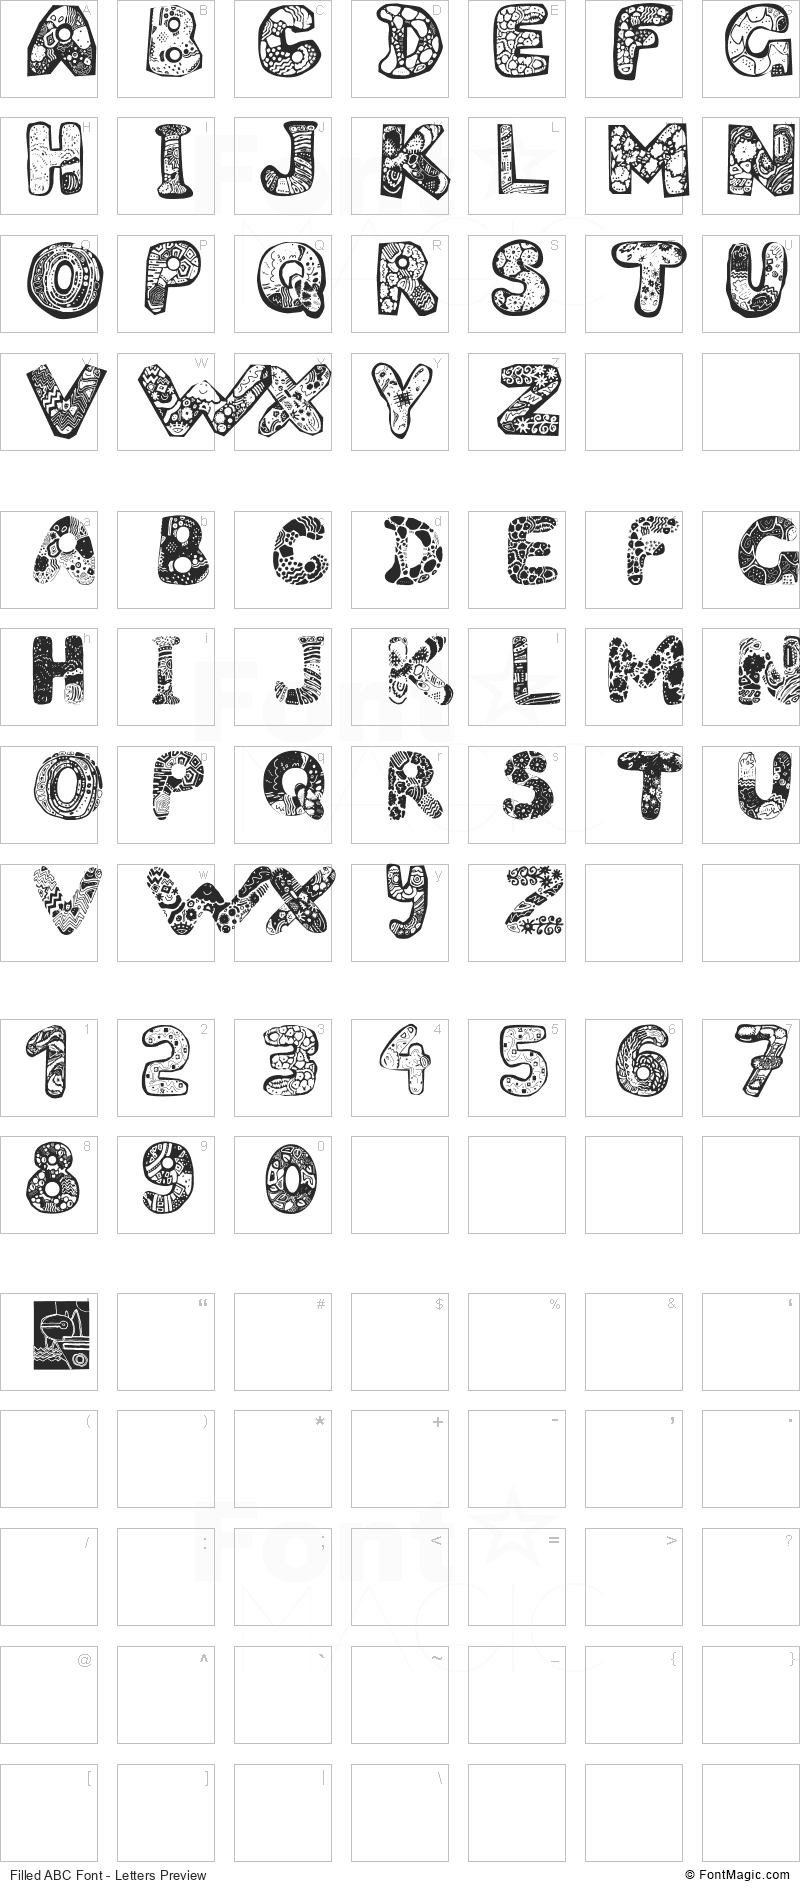 Filled ABC Font - All Latters Preview Chart